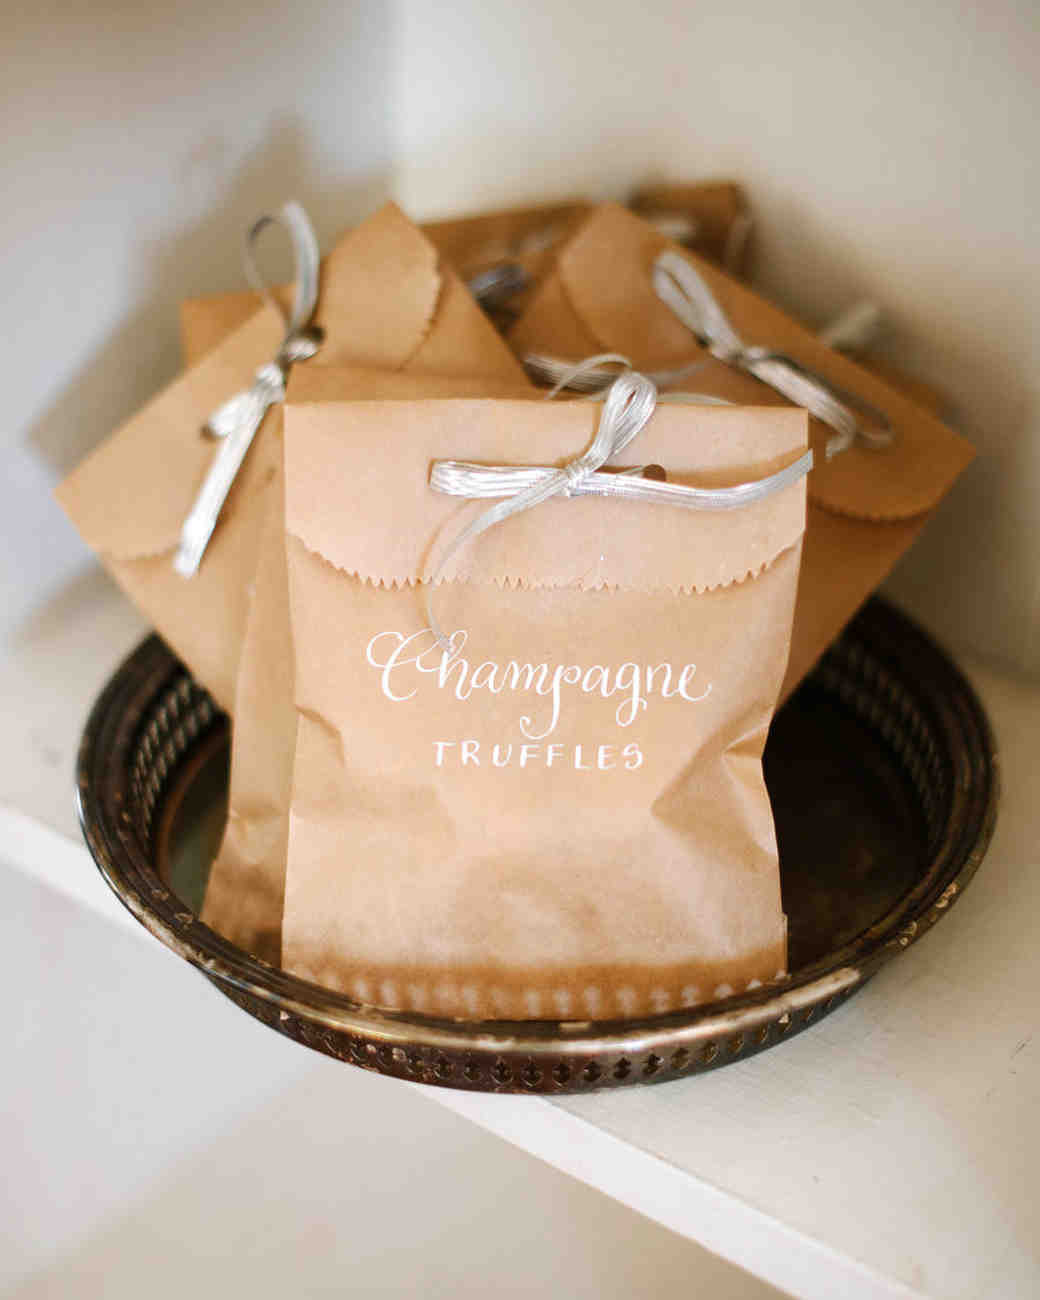 The 21 Best Ideas for Engagement Party Favors Ideas - Home, Family